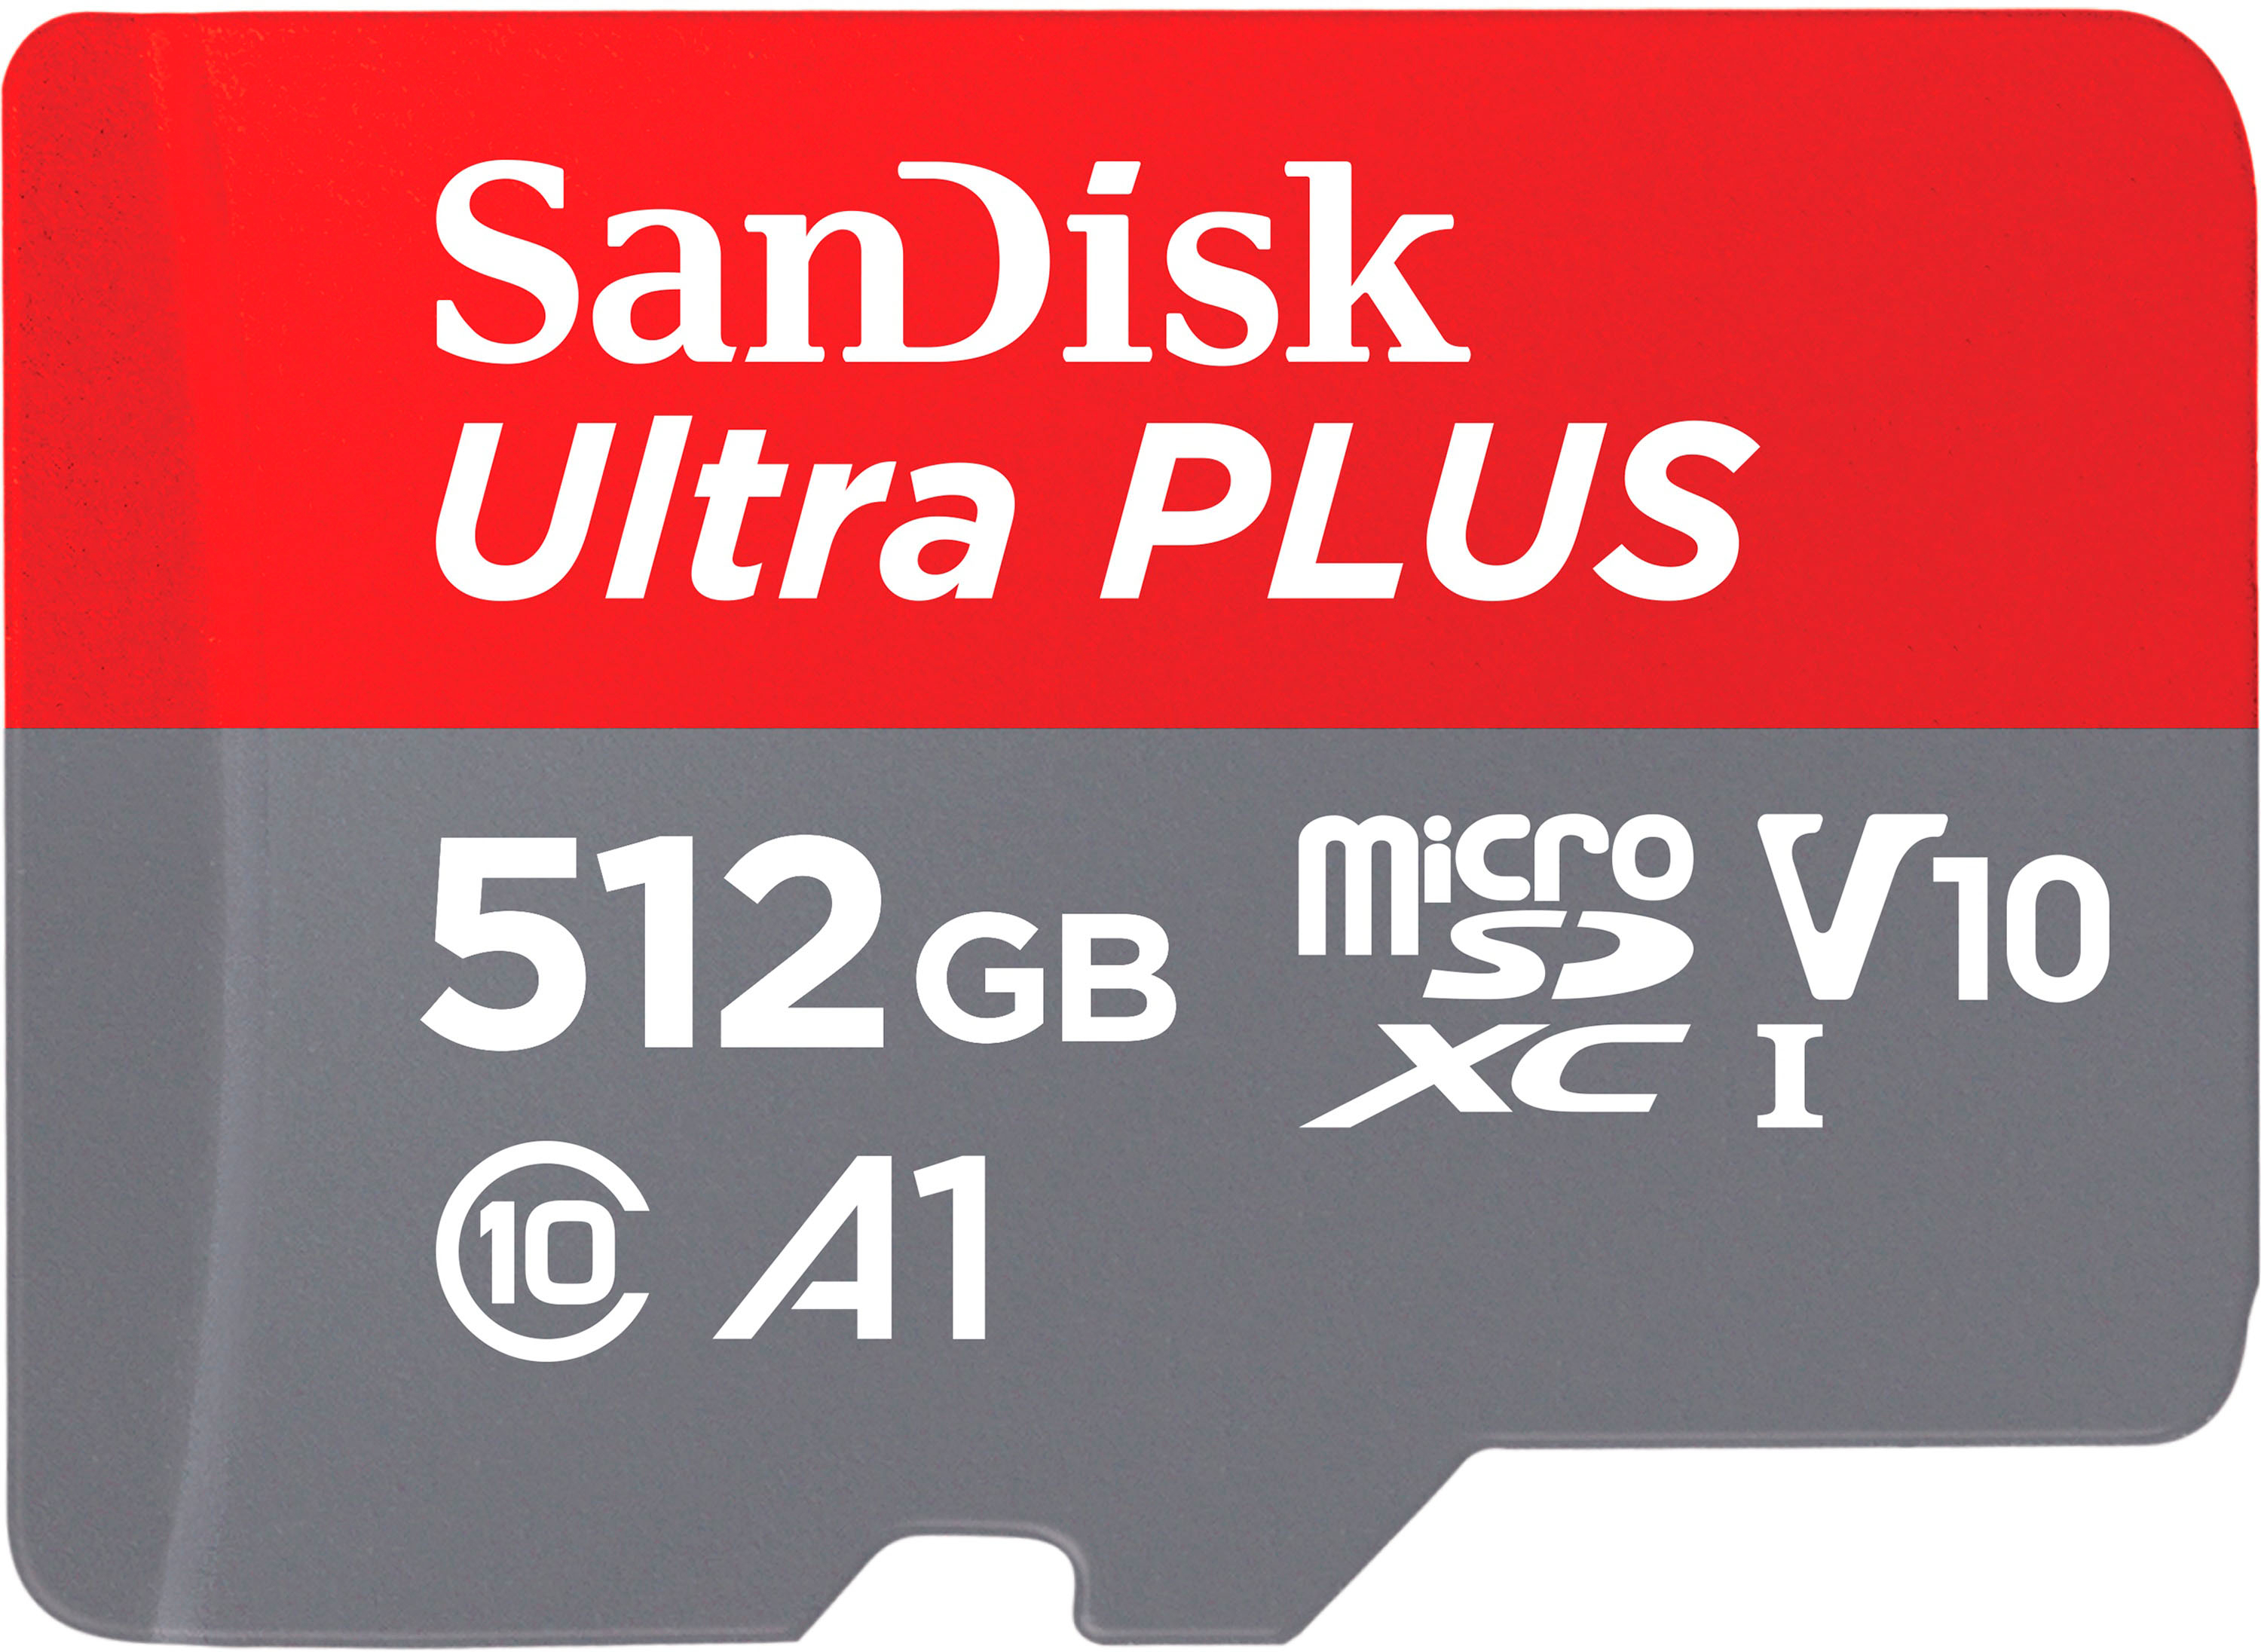 Sd card to usb • Compare (81 products) see prices »